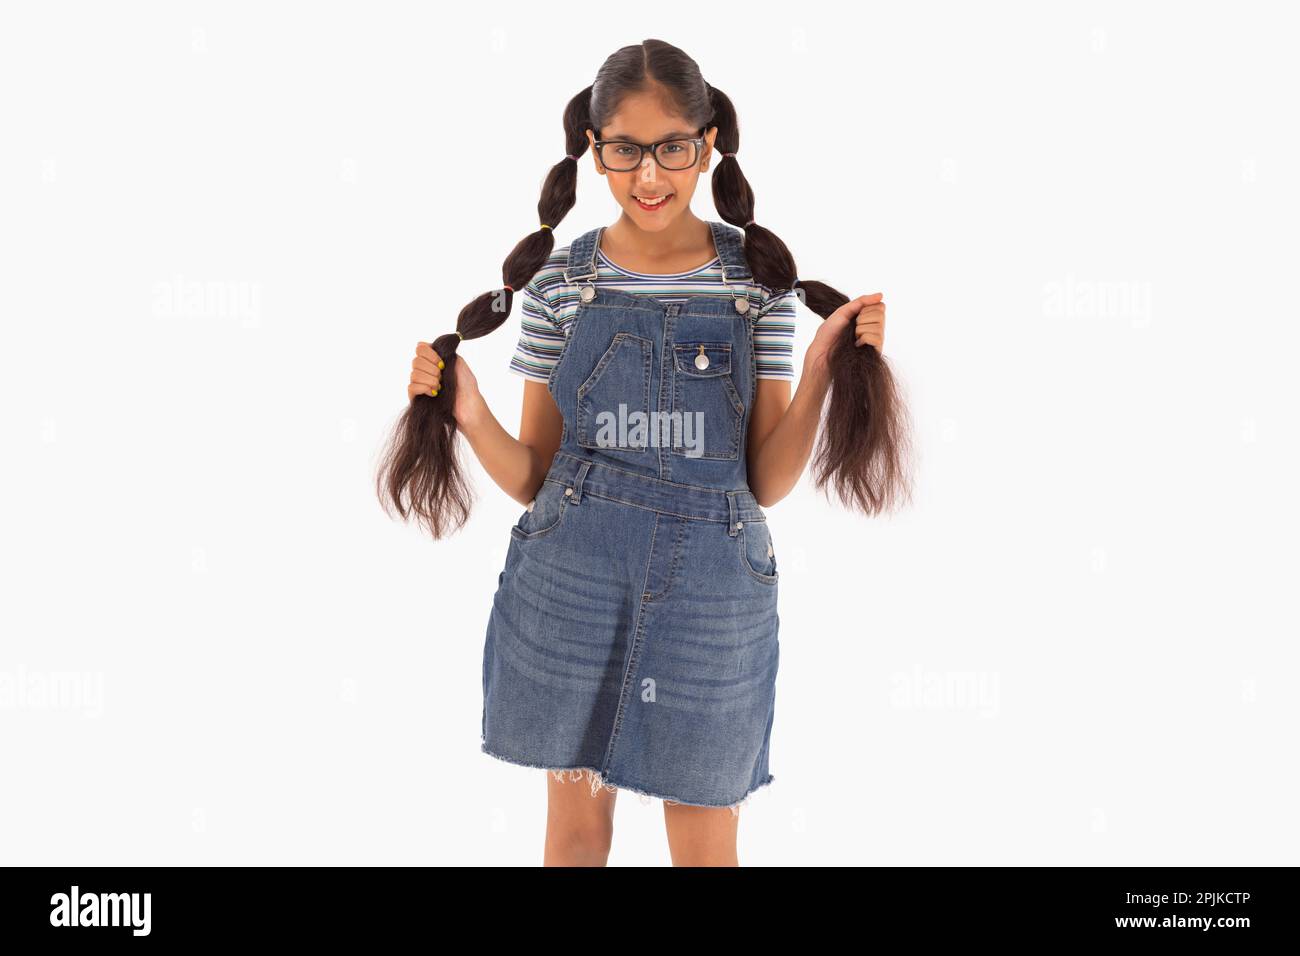 Tween girl with spectacles holding her braided hair against white background Stock Photo